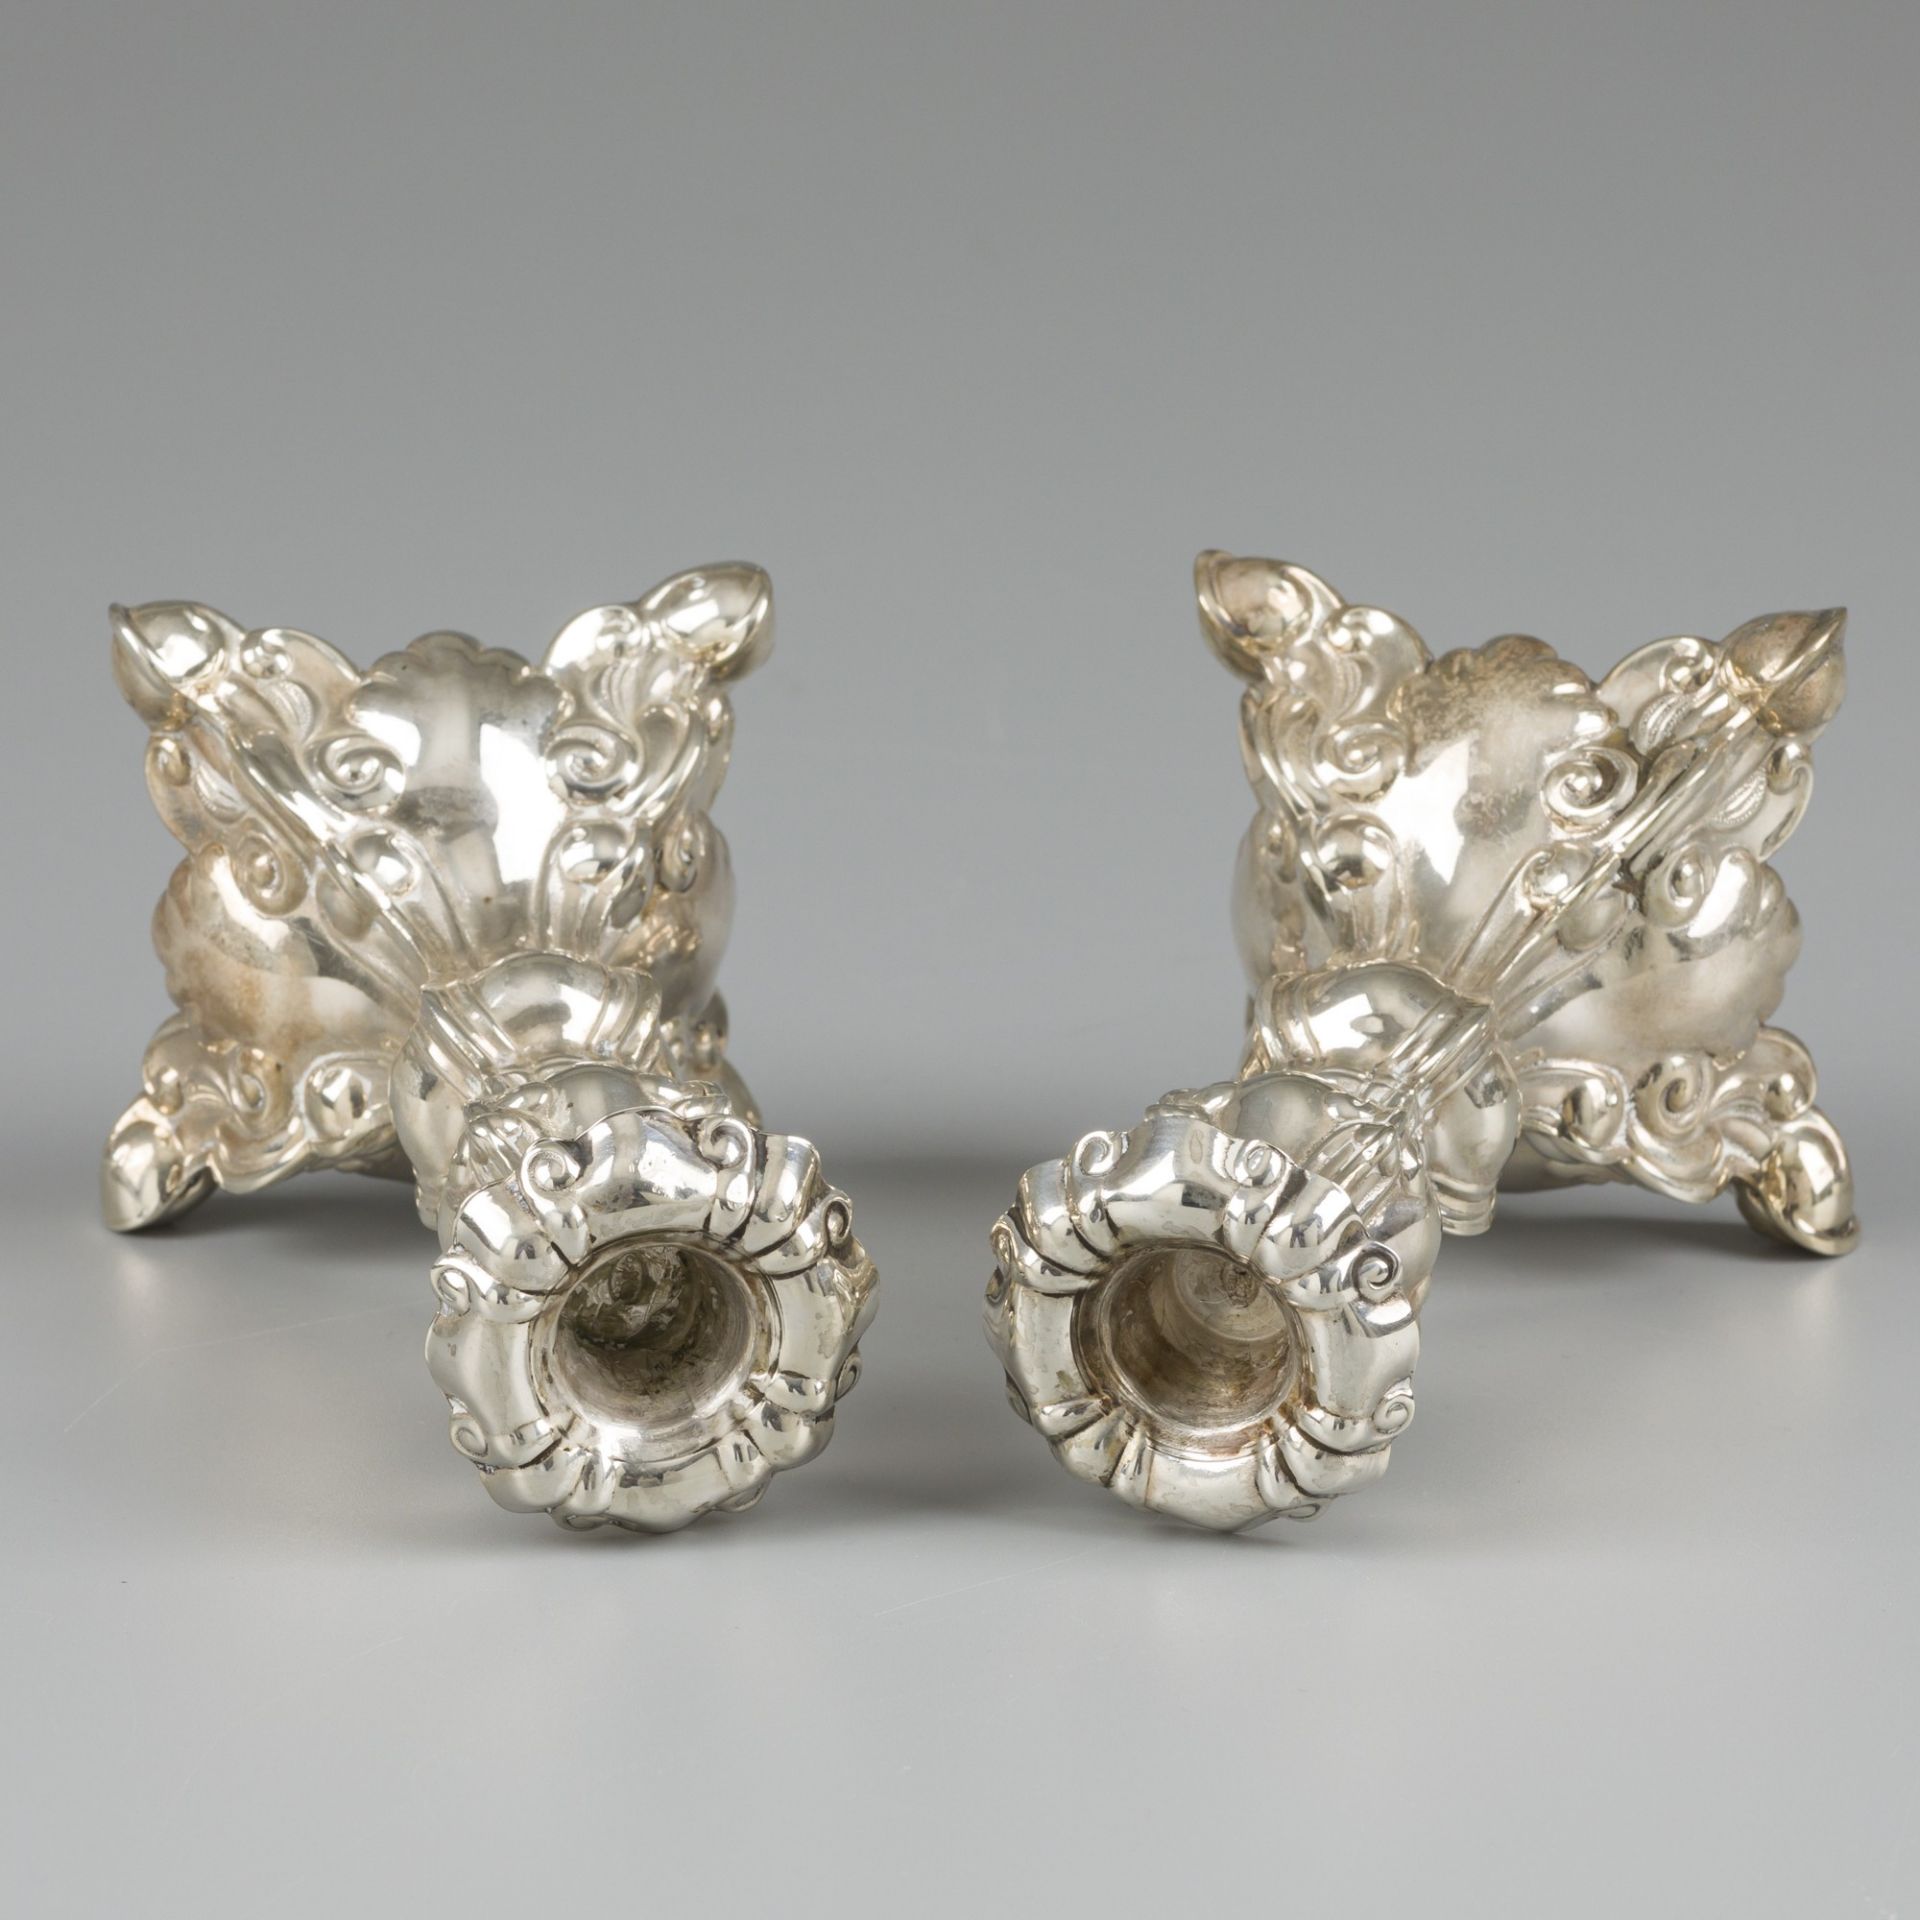 2-piece set of silver candlesticks. - Image 2 of 5